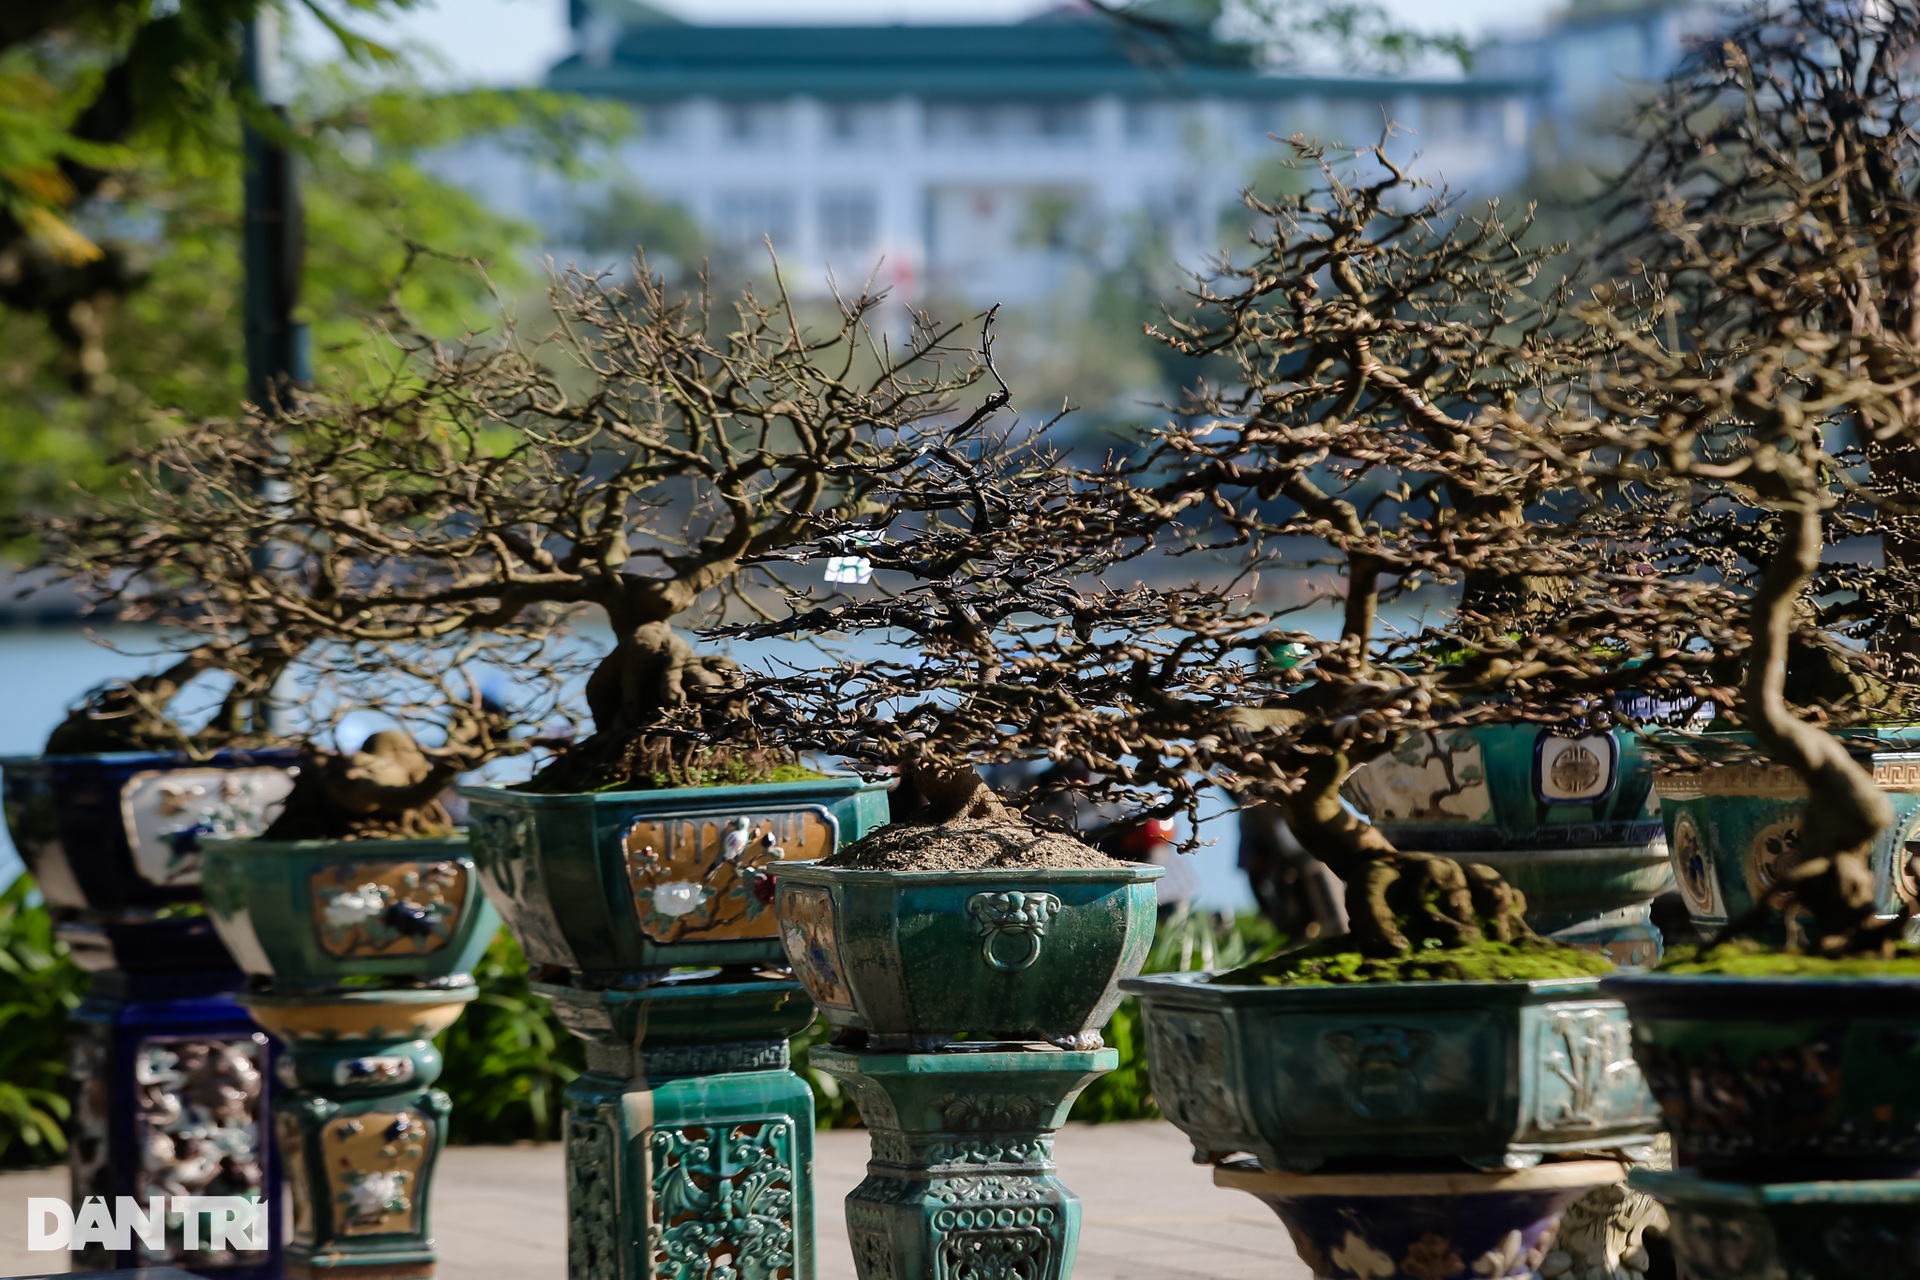 Admire the unique ancient apricot trees at the Hoang Mai festival in Hue - 4